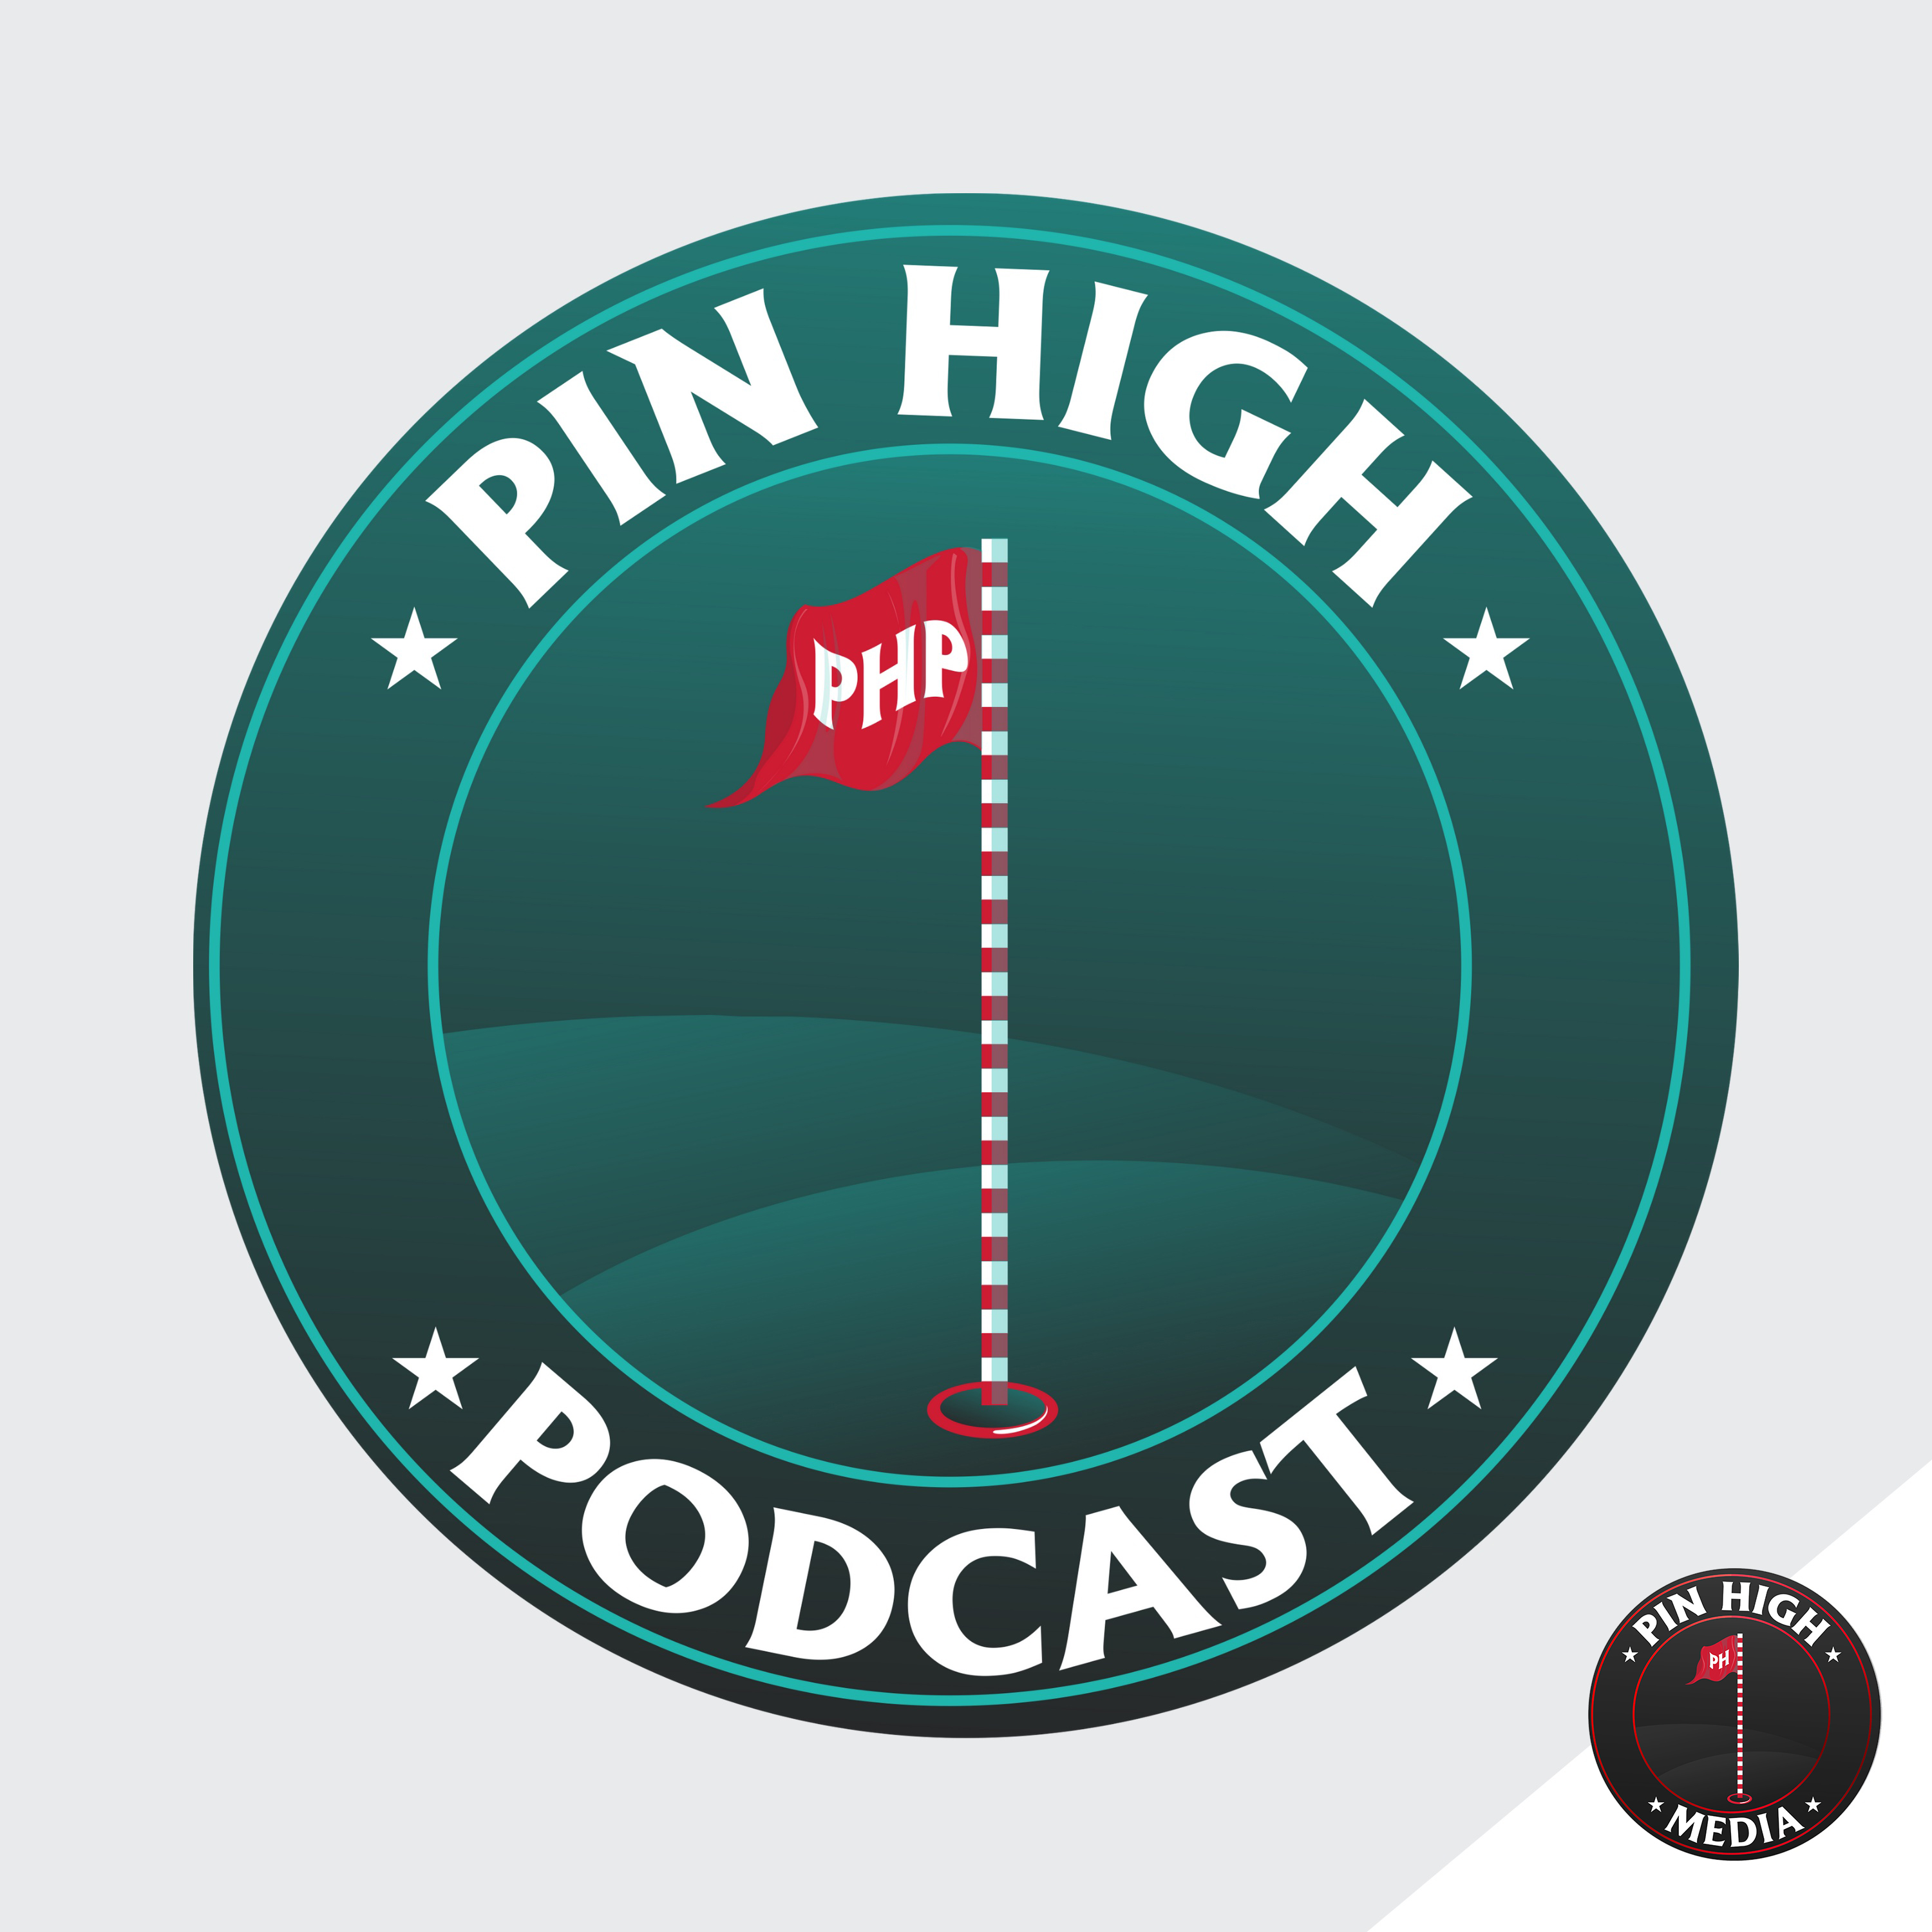 Pin High Podcast Ep. 172: LIV Golf’s Ratings Were Shocking